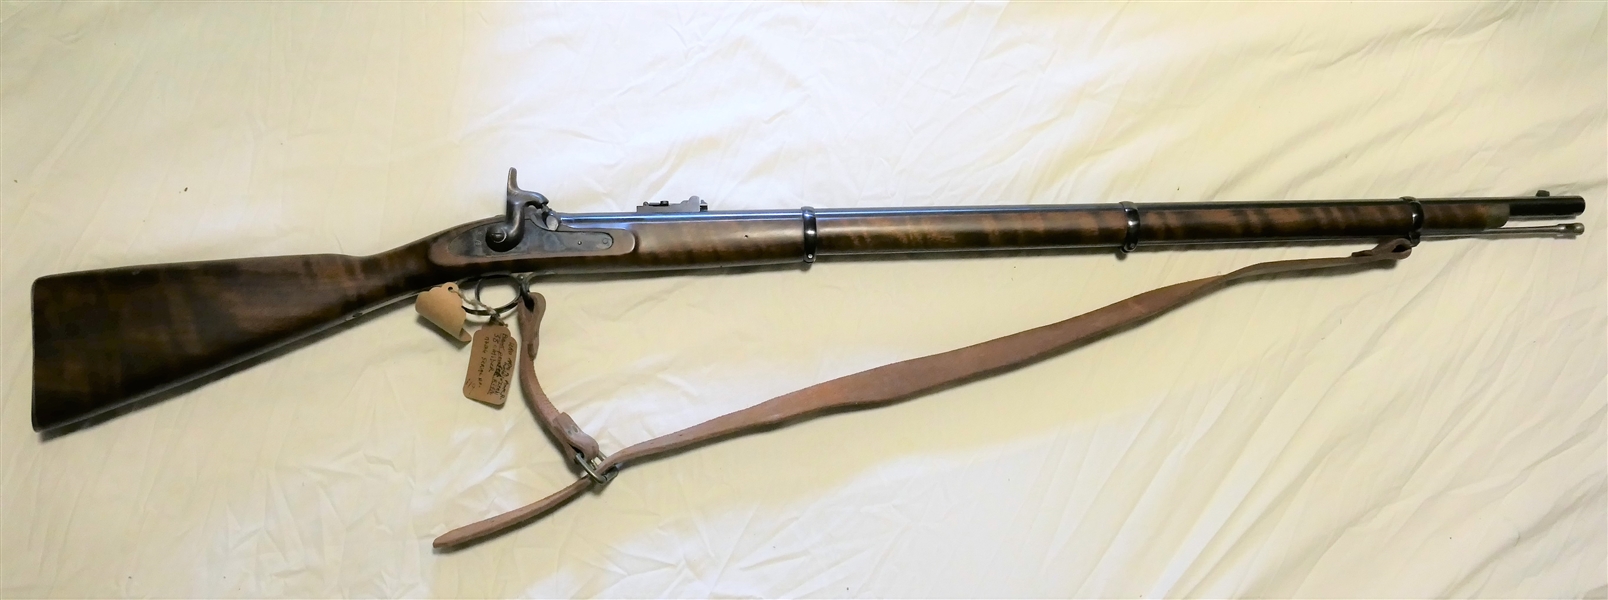 Euroarms of America -  Made in Italy .58 Caliber Black Powder Long Rifle - With Leather Sling Strap